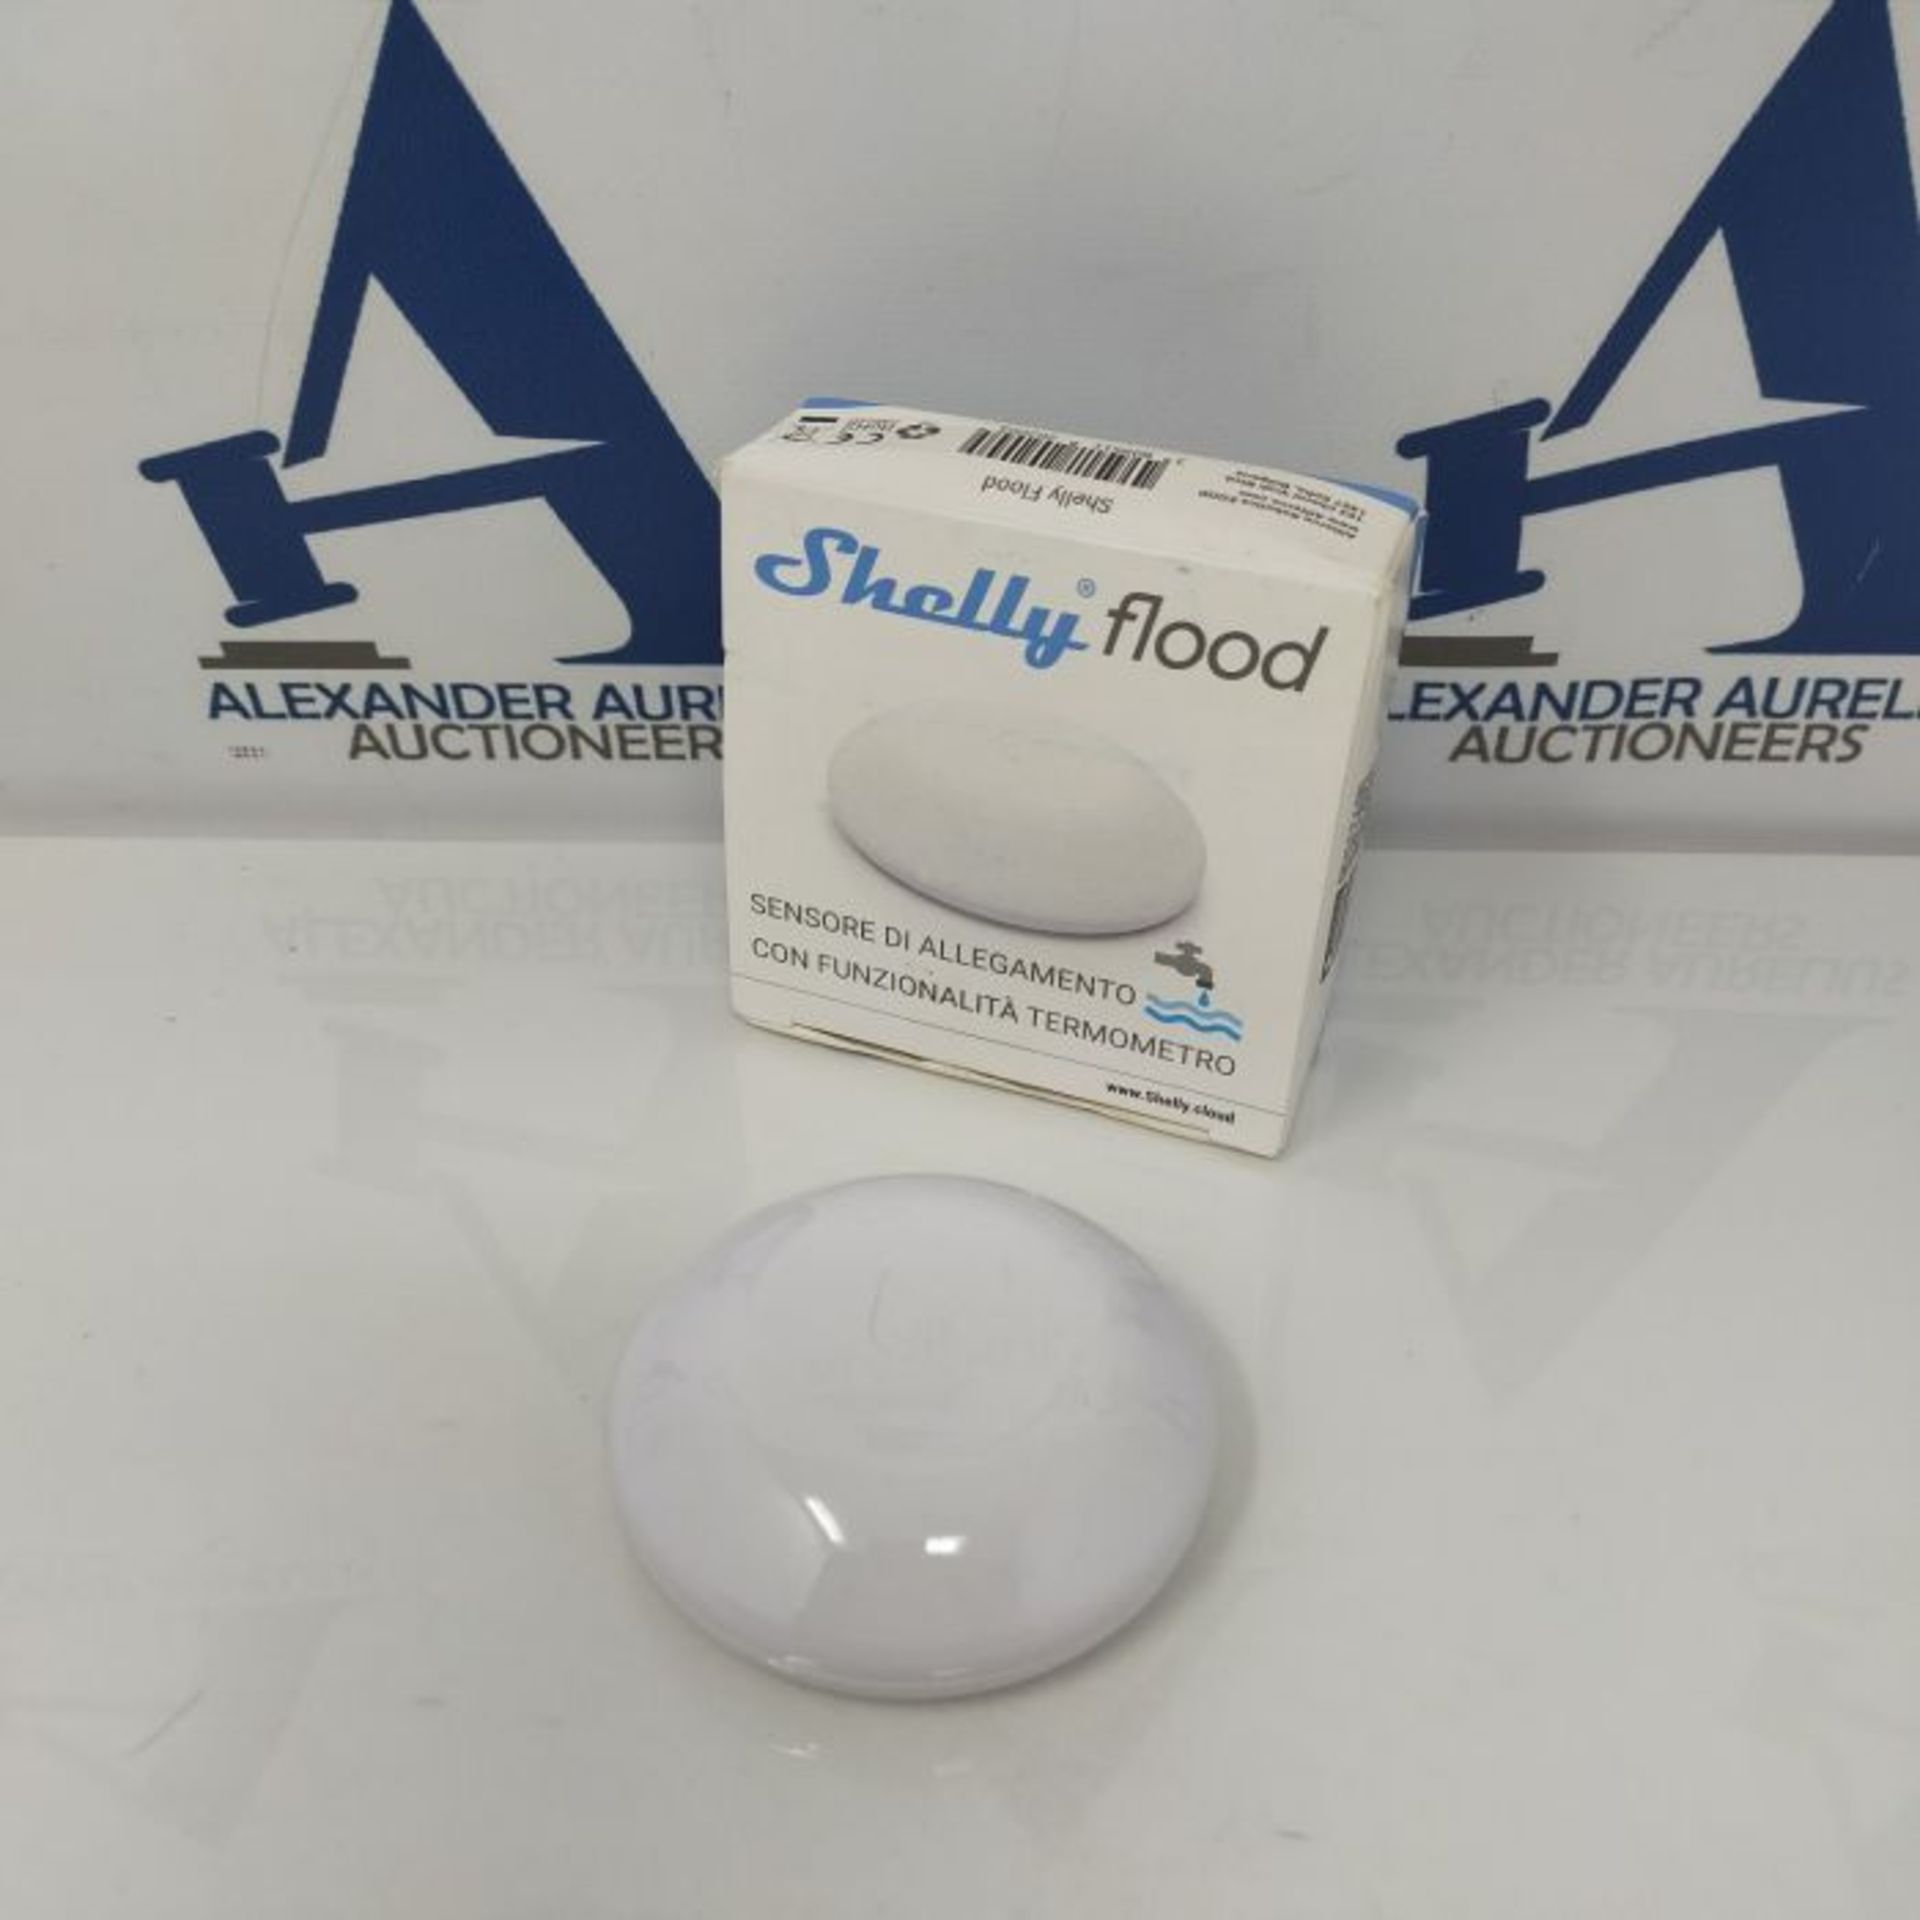 Shelly Flood Wireless Flood Sensor with Temperature Measurement, Drip and Leak Alarm, - Image 2 of 3